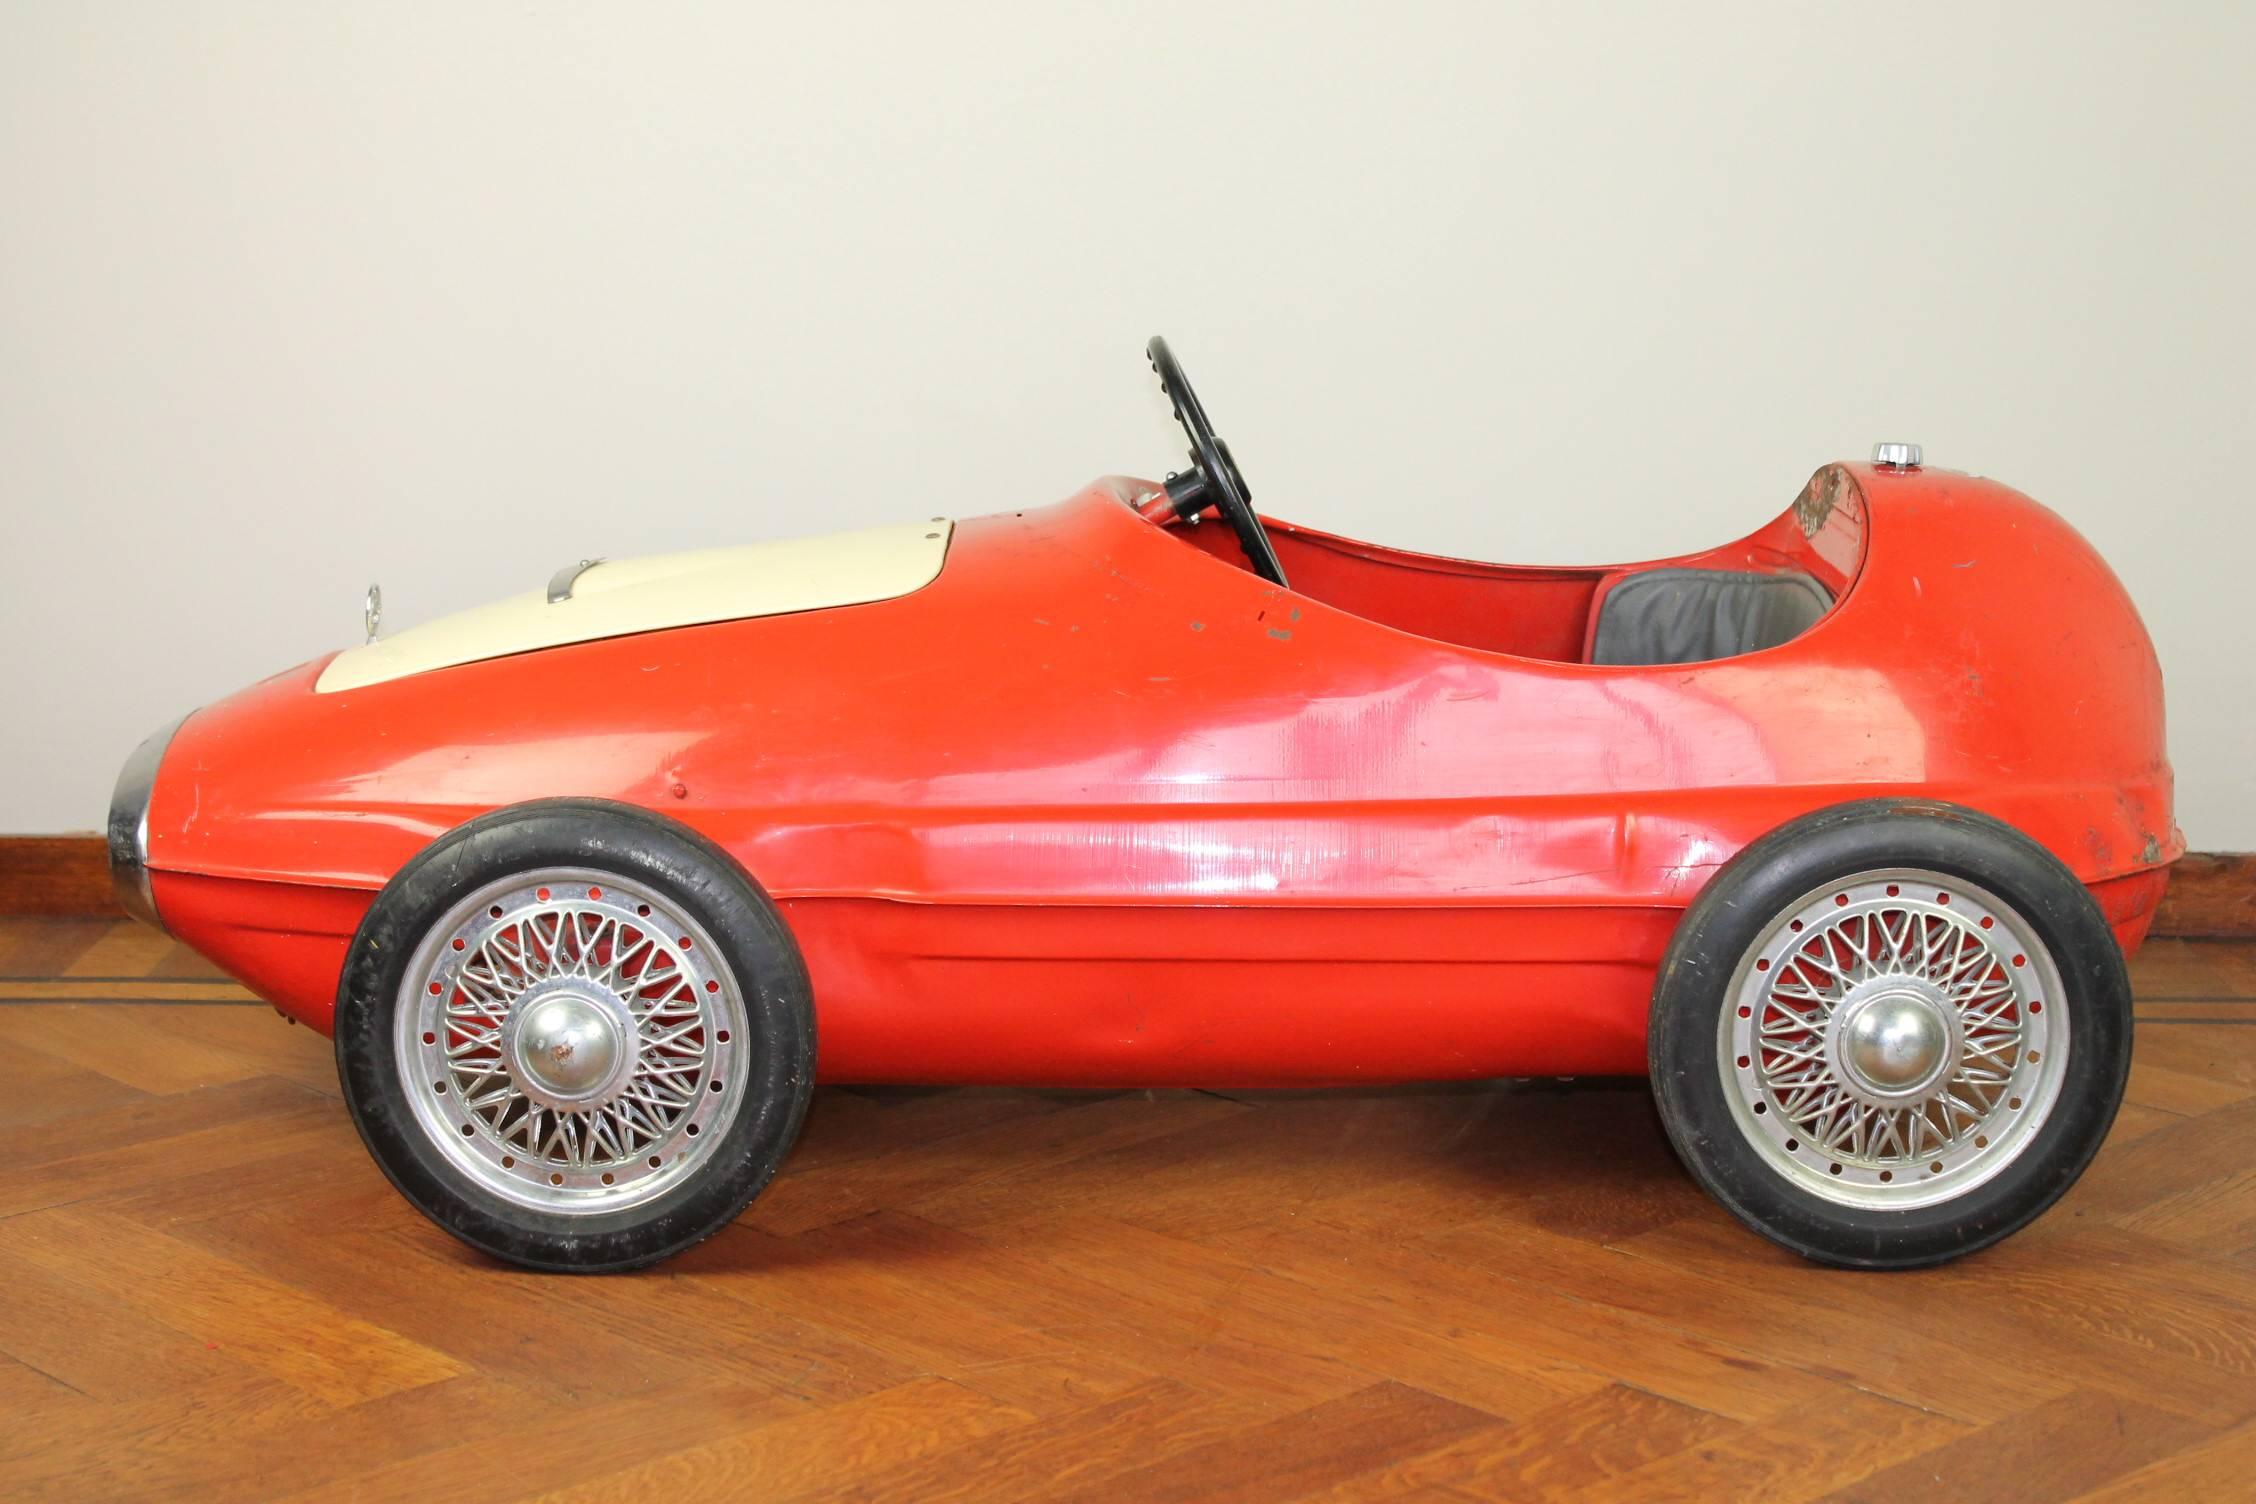 Sporty metal racer pedal car made by Giordani Bologna Italy from 1966.
Type: Auto Sprint M-MR / Ferrari - Maserati - Sportscar - Racecar.
This auto sprint line acquired a curious detail namely the mock engine mounted under a open able